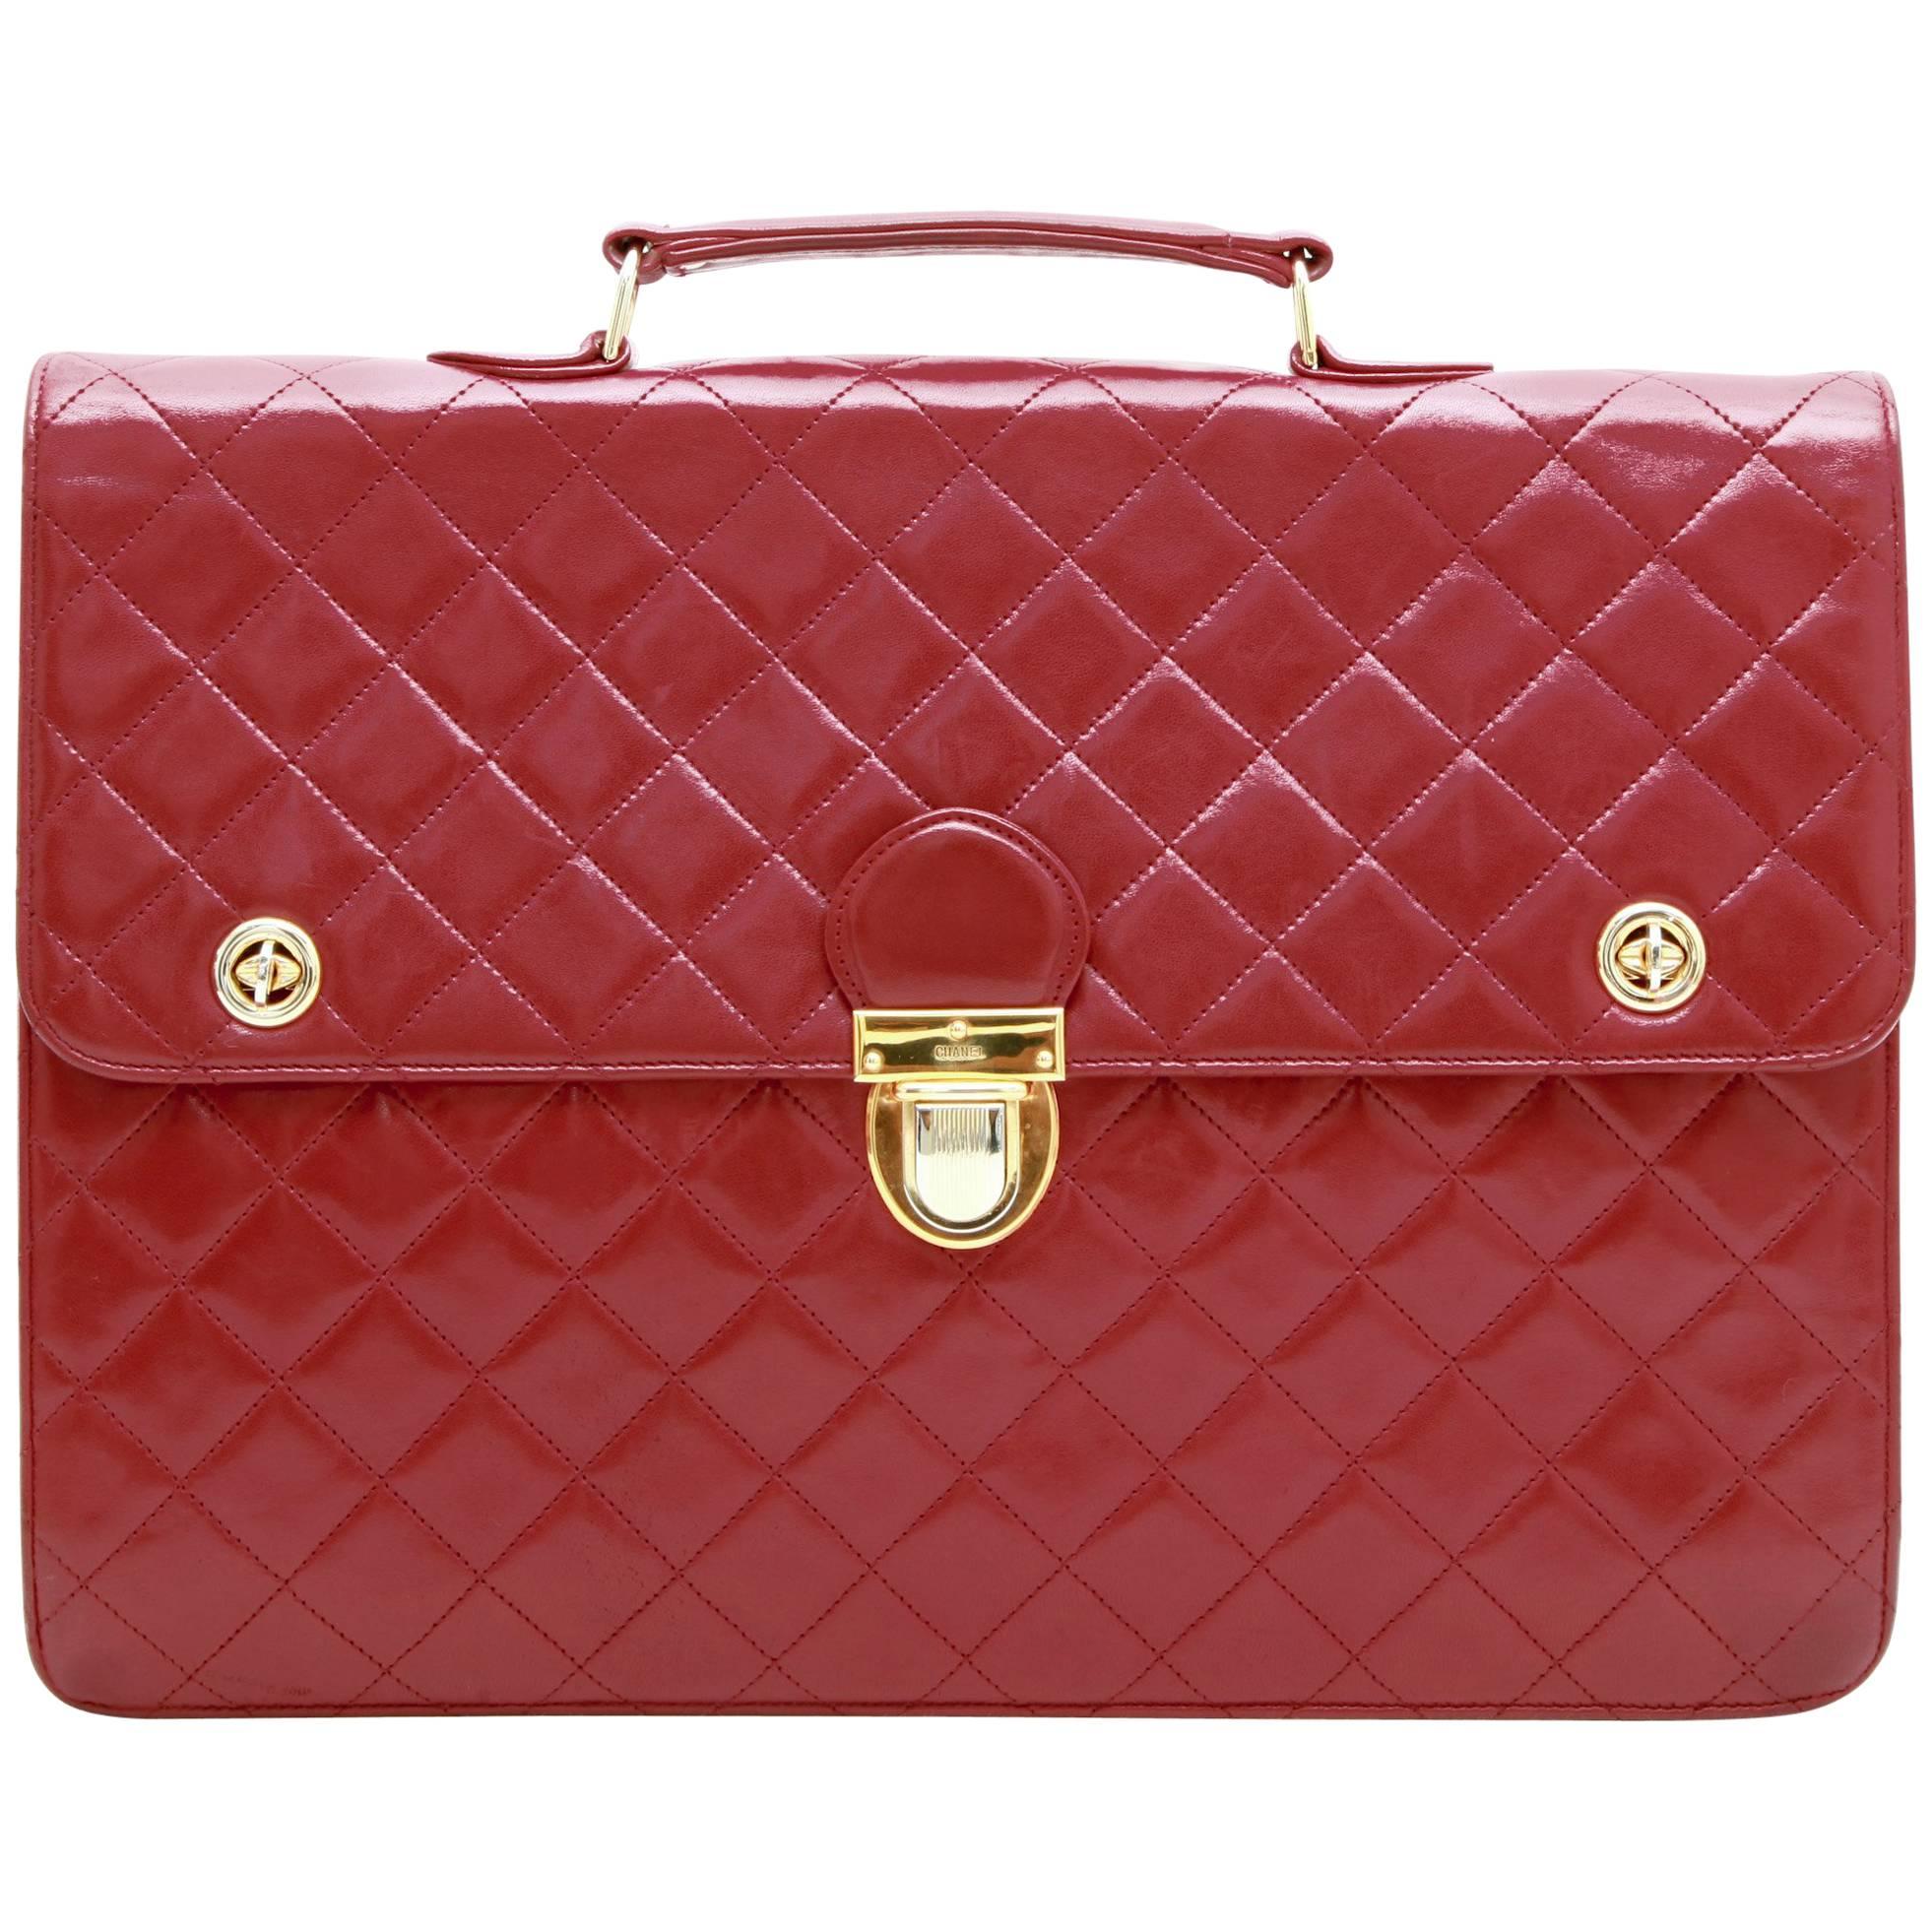 CHANEL Vintage Schoolbag in Red Quilted Lambskin leather